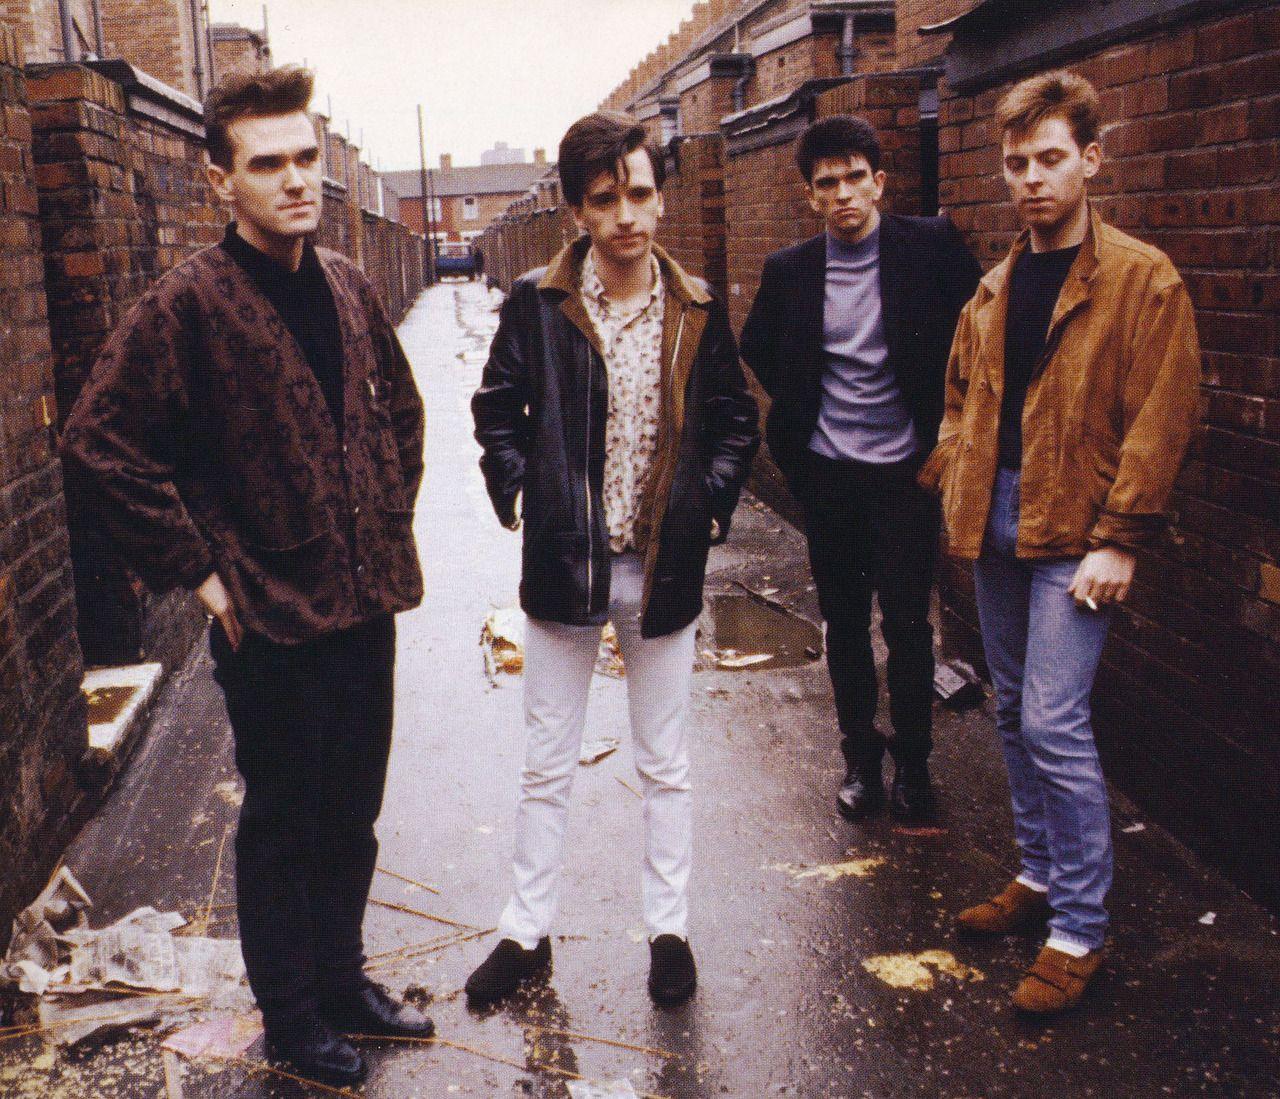 FIVE OF THE SMITHS' MOST RELATABLE LYRICS